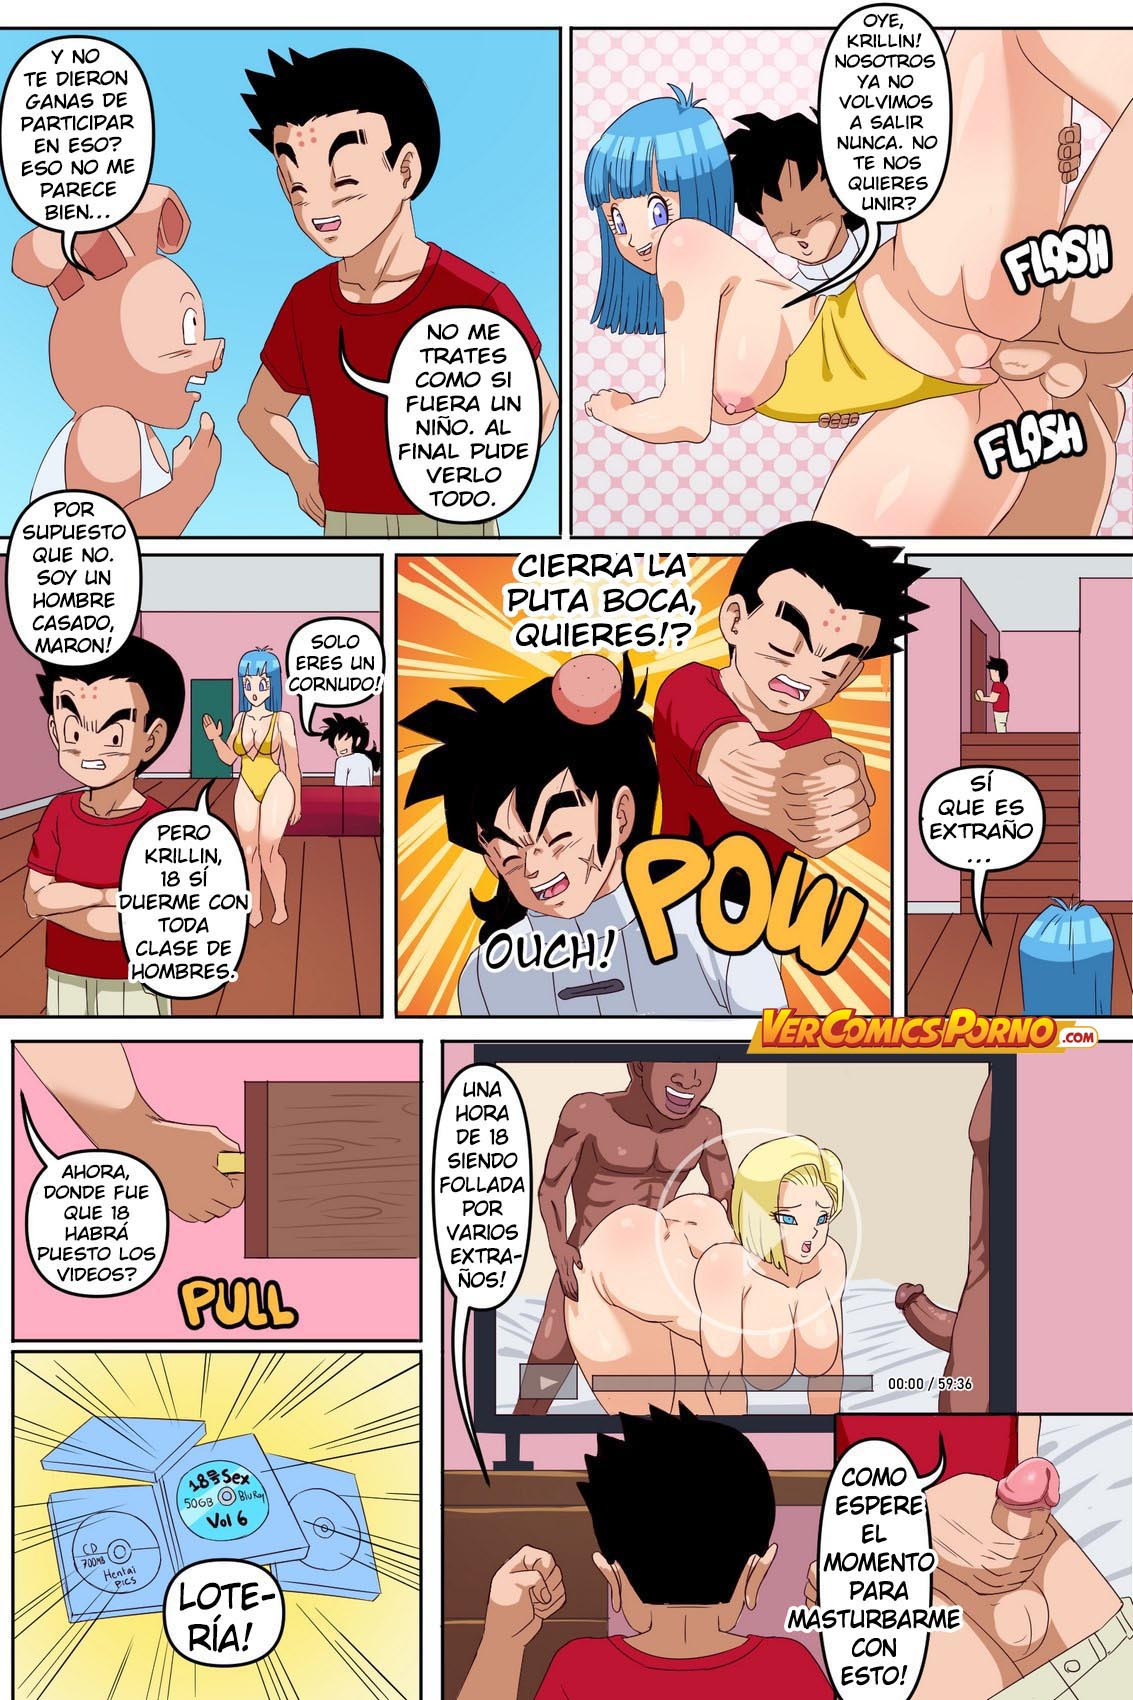 [Pink Pawg] Android 18 NTR Ep.2 (Traduccion Exclusiva) - 23